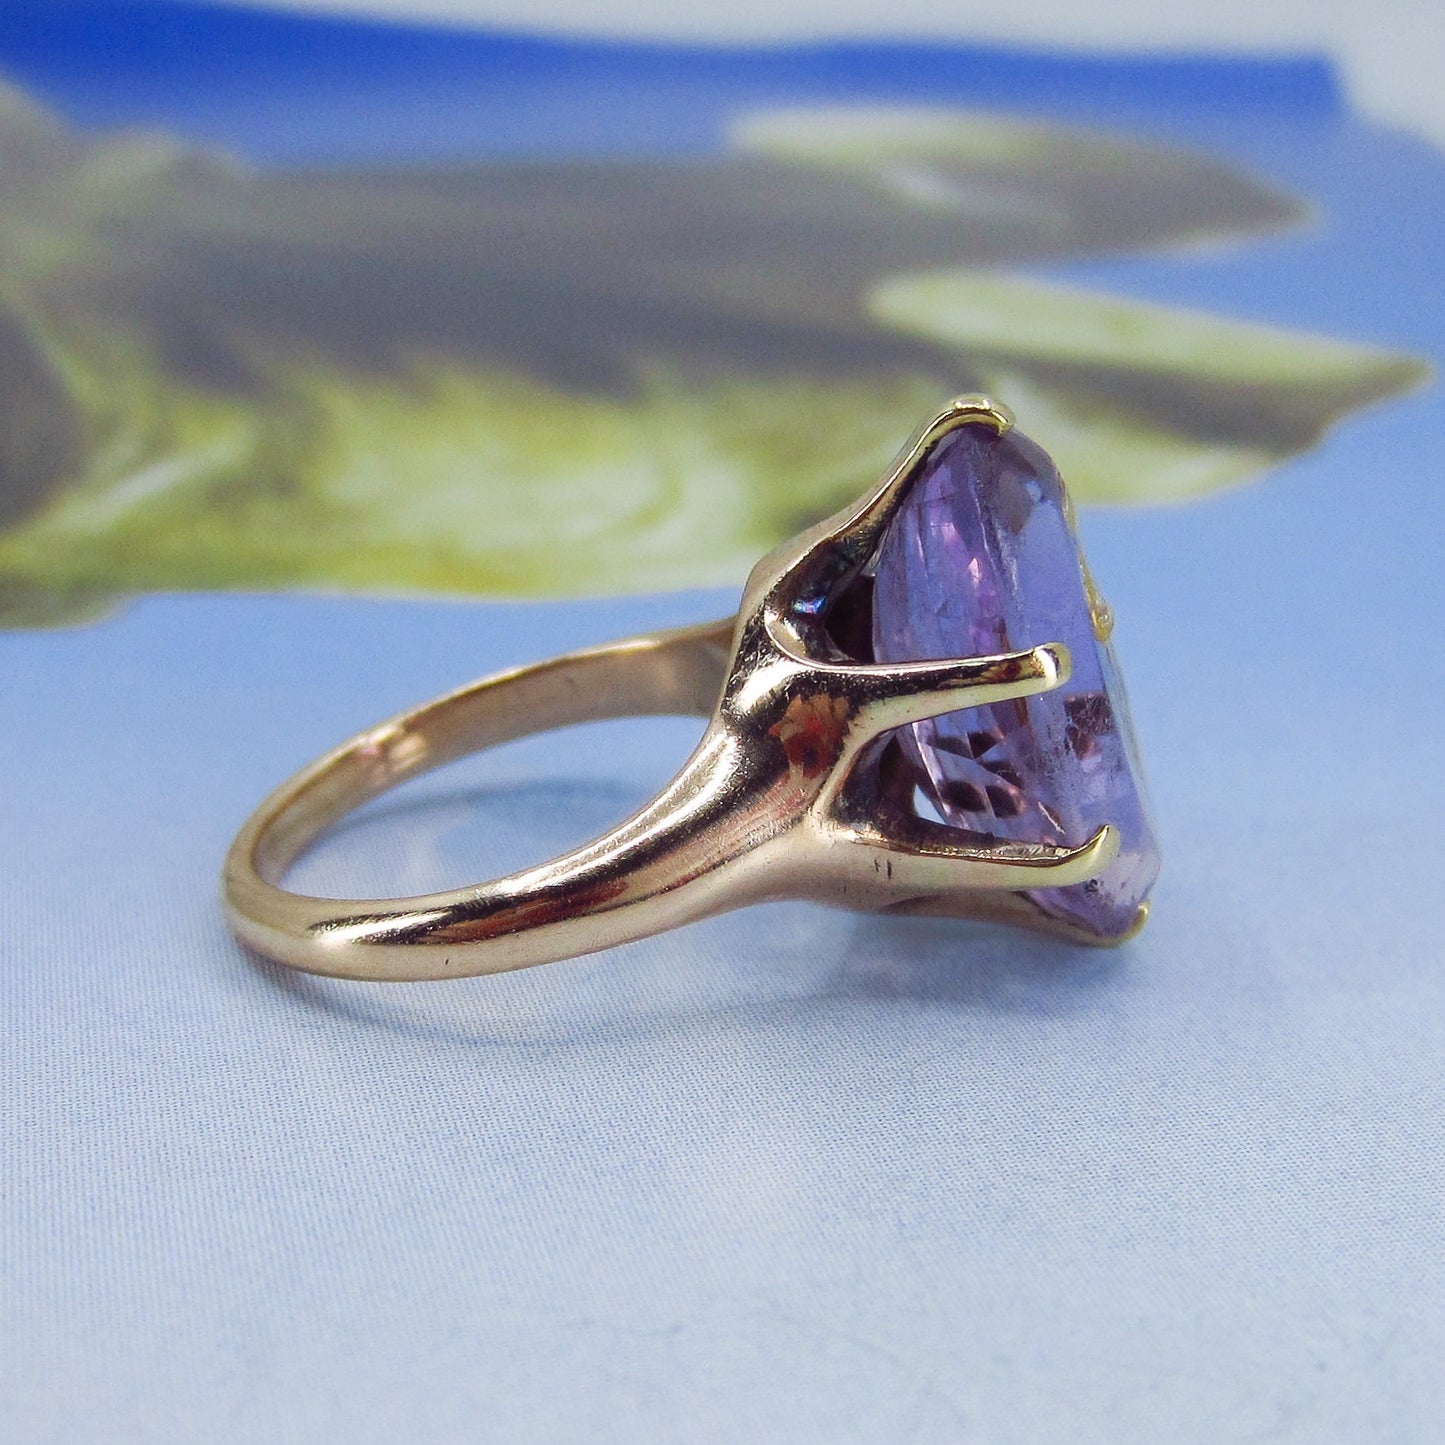 SOLD—Victorian Amethyst and Diamond Flower Ring 14k c. 1890